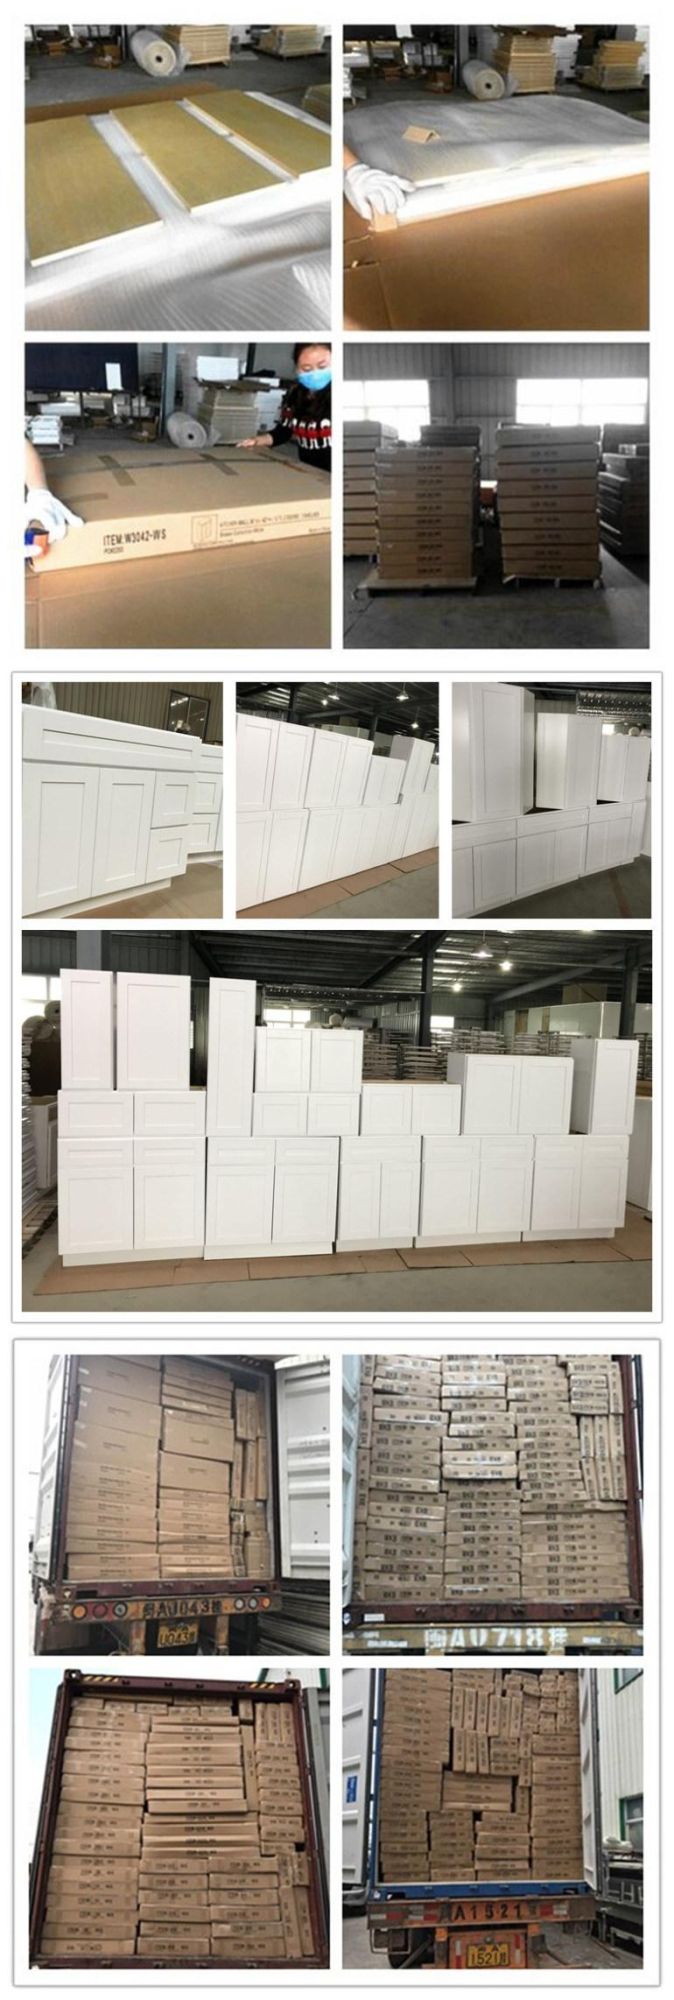 China Kitchen Cabinet Factory Supplier for Amerian Standard Style Rta Kitchen Cabinet